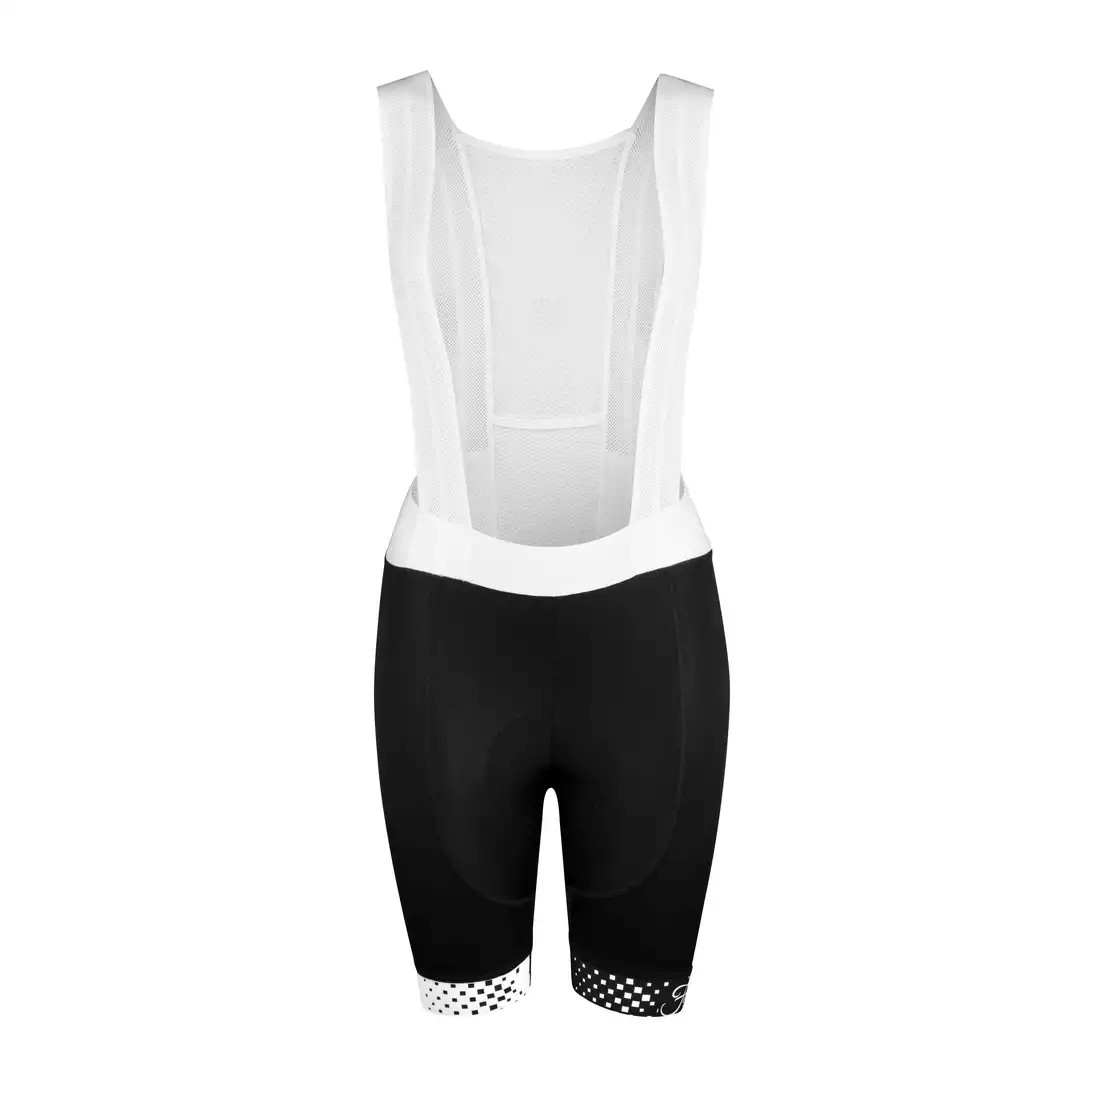 FORCE VISION LADY Women's cycling shorts with braces, black and white